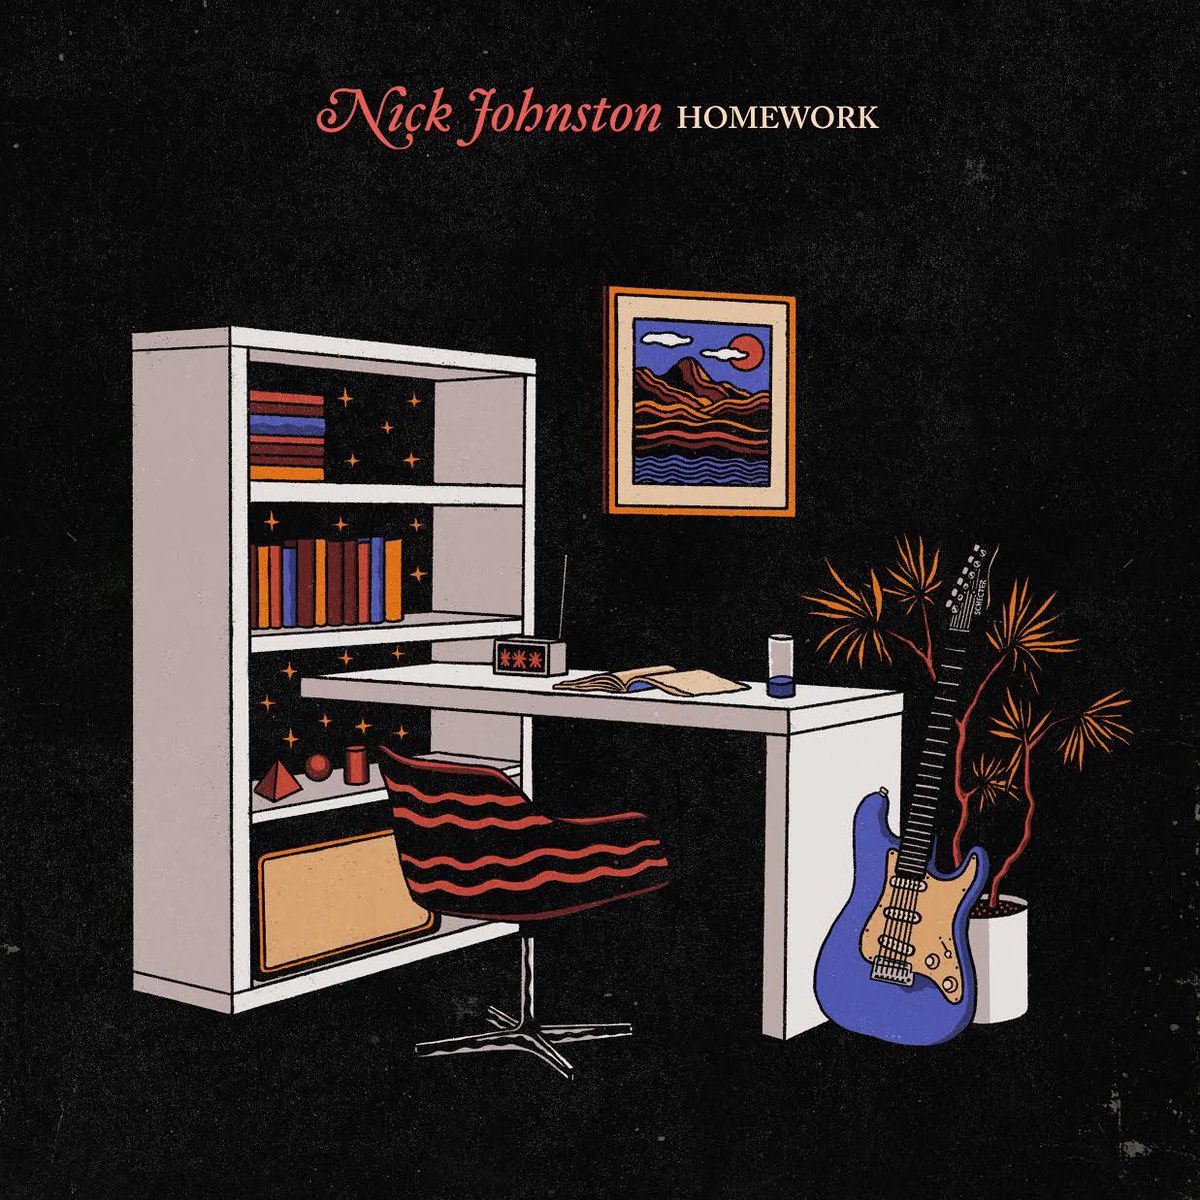 Membership Site Review: Homework by @NickJMusic 'If you like Nick Johnston’s guitar style, this unique format is a great opportunity to learn and connect with Nick.' azsamadlessons.com/membership-sit… 👆